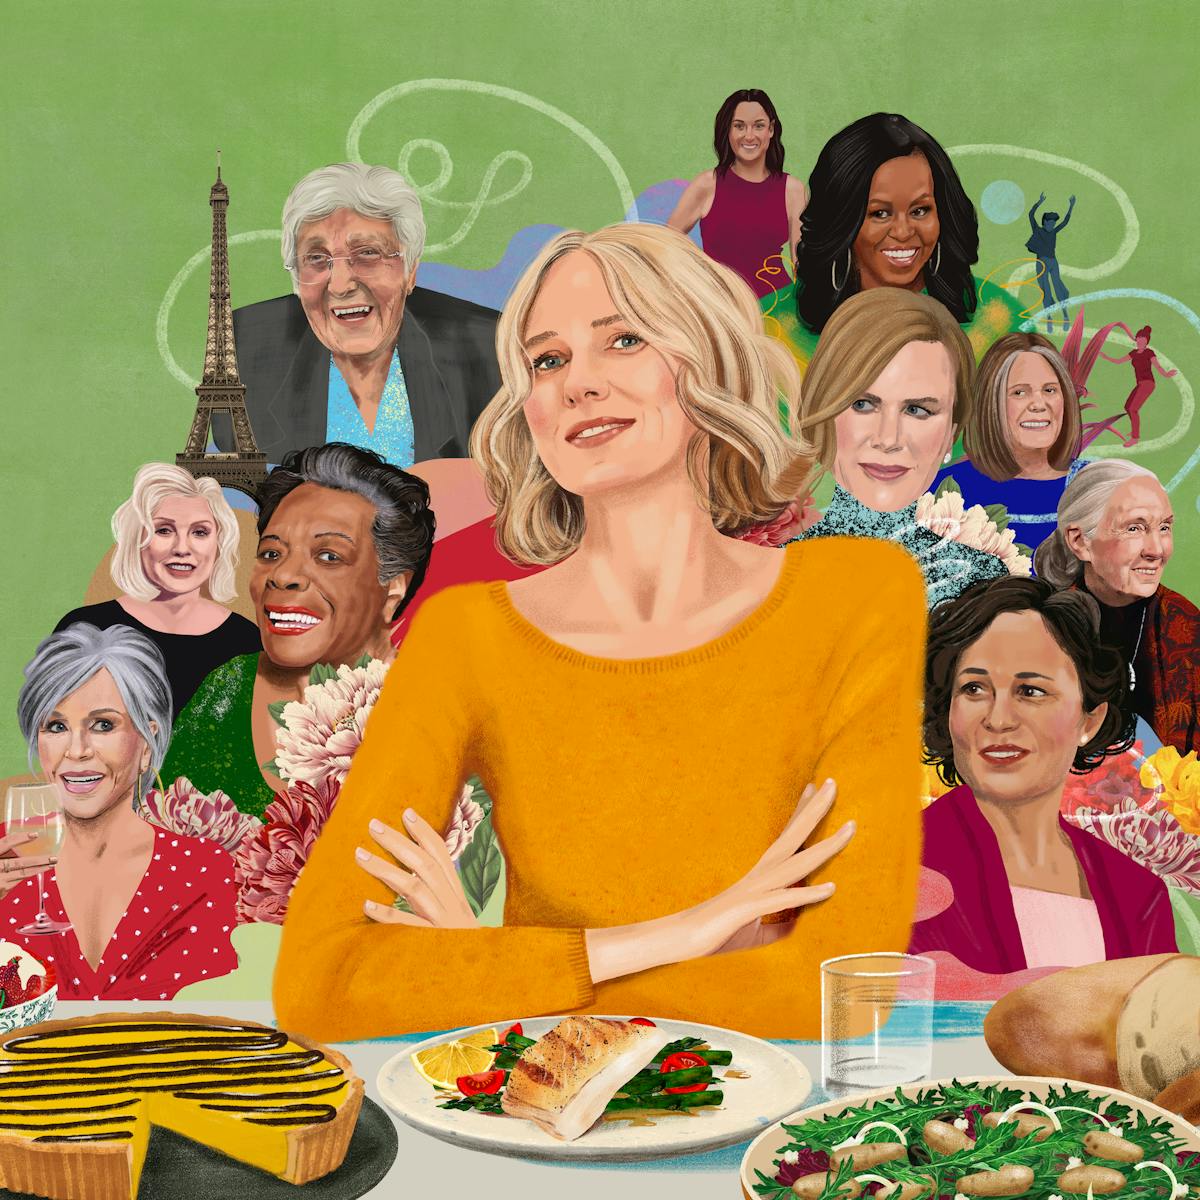 An illustration of Naomi Watts sitting in front her dinnery party, which includes Jane Fonda, Rebecca Rig, her grandmother, Michelle Obama, Nicole Kidman, Gloria Steinem, Maya Angelou, Debbie Harry, Jane Goodall, Celeste Barber.